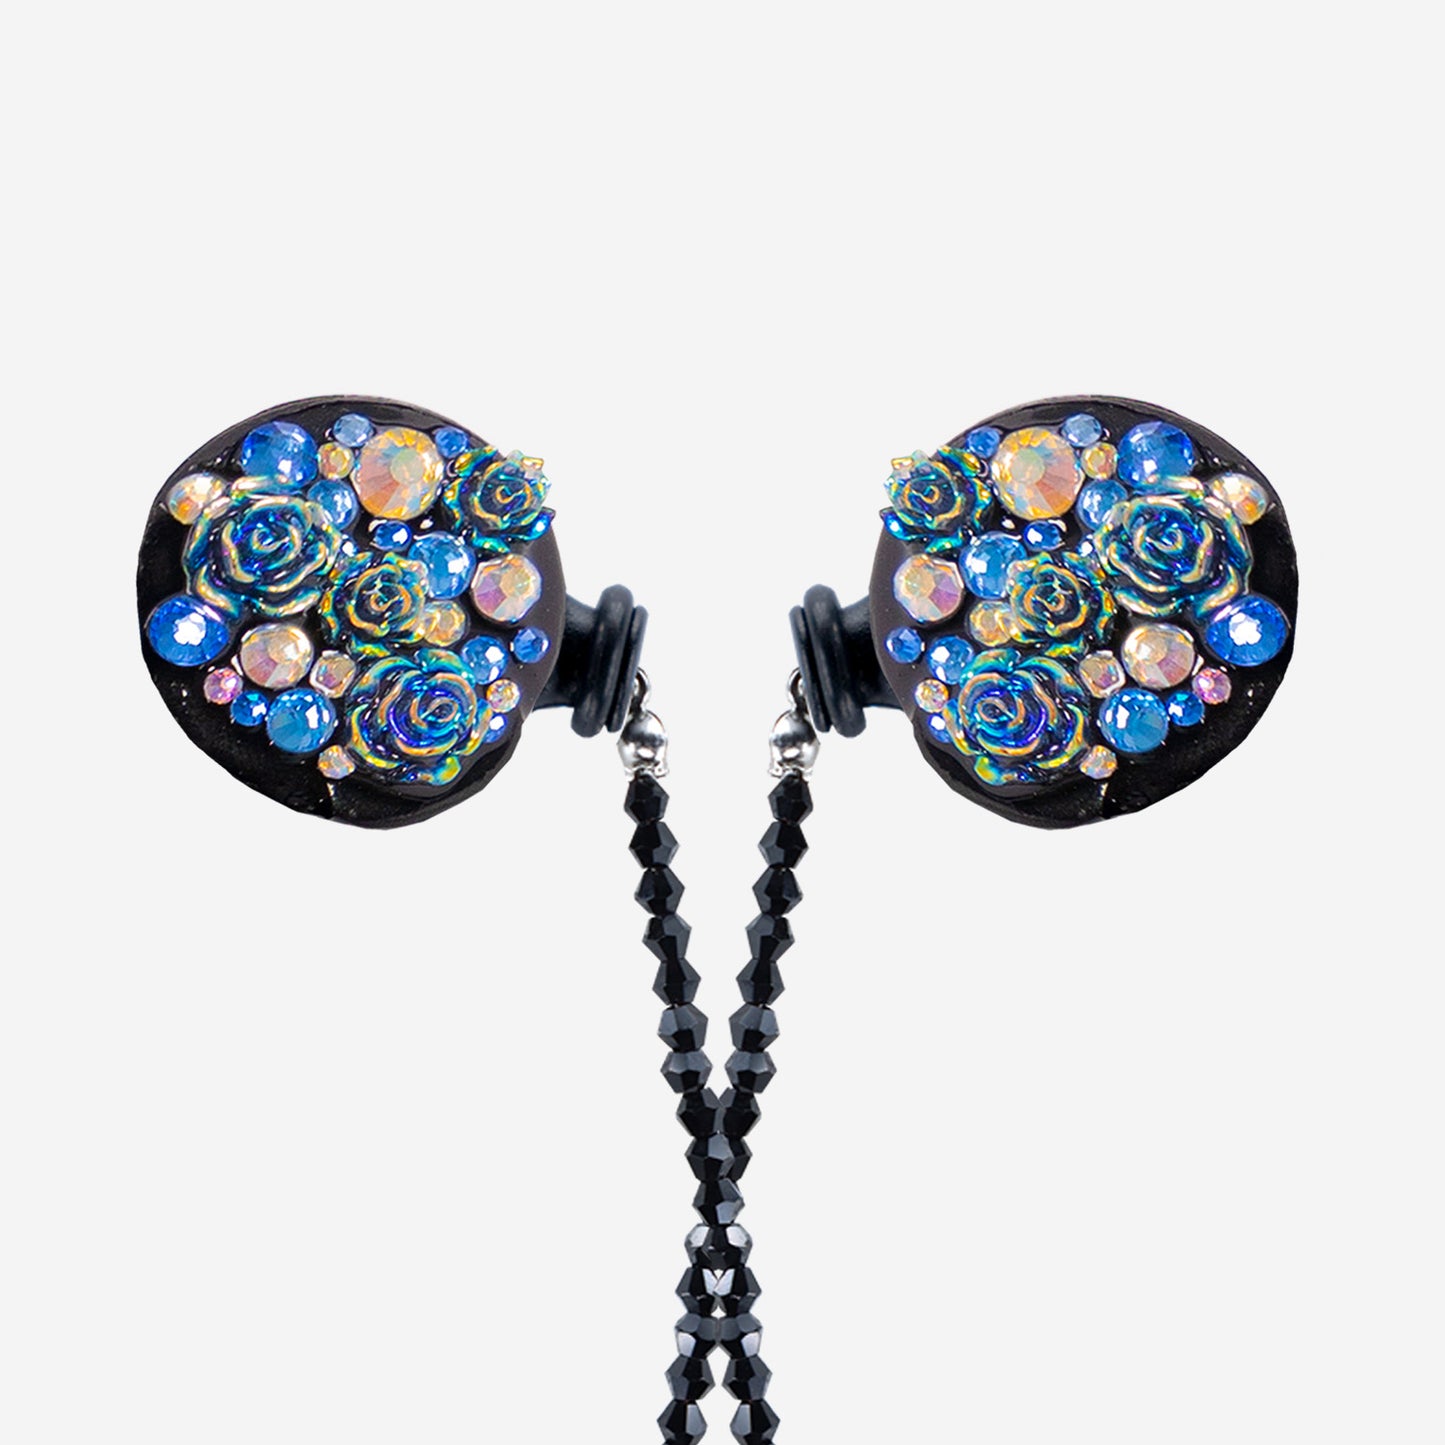 The Blue Roses Earbud Drop